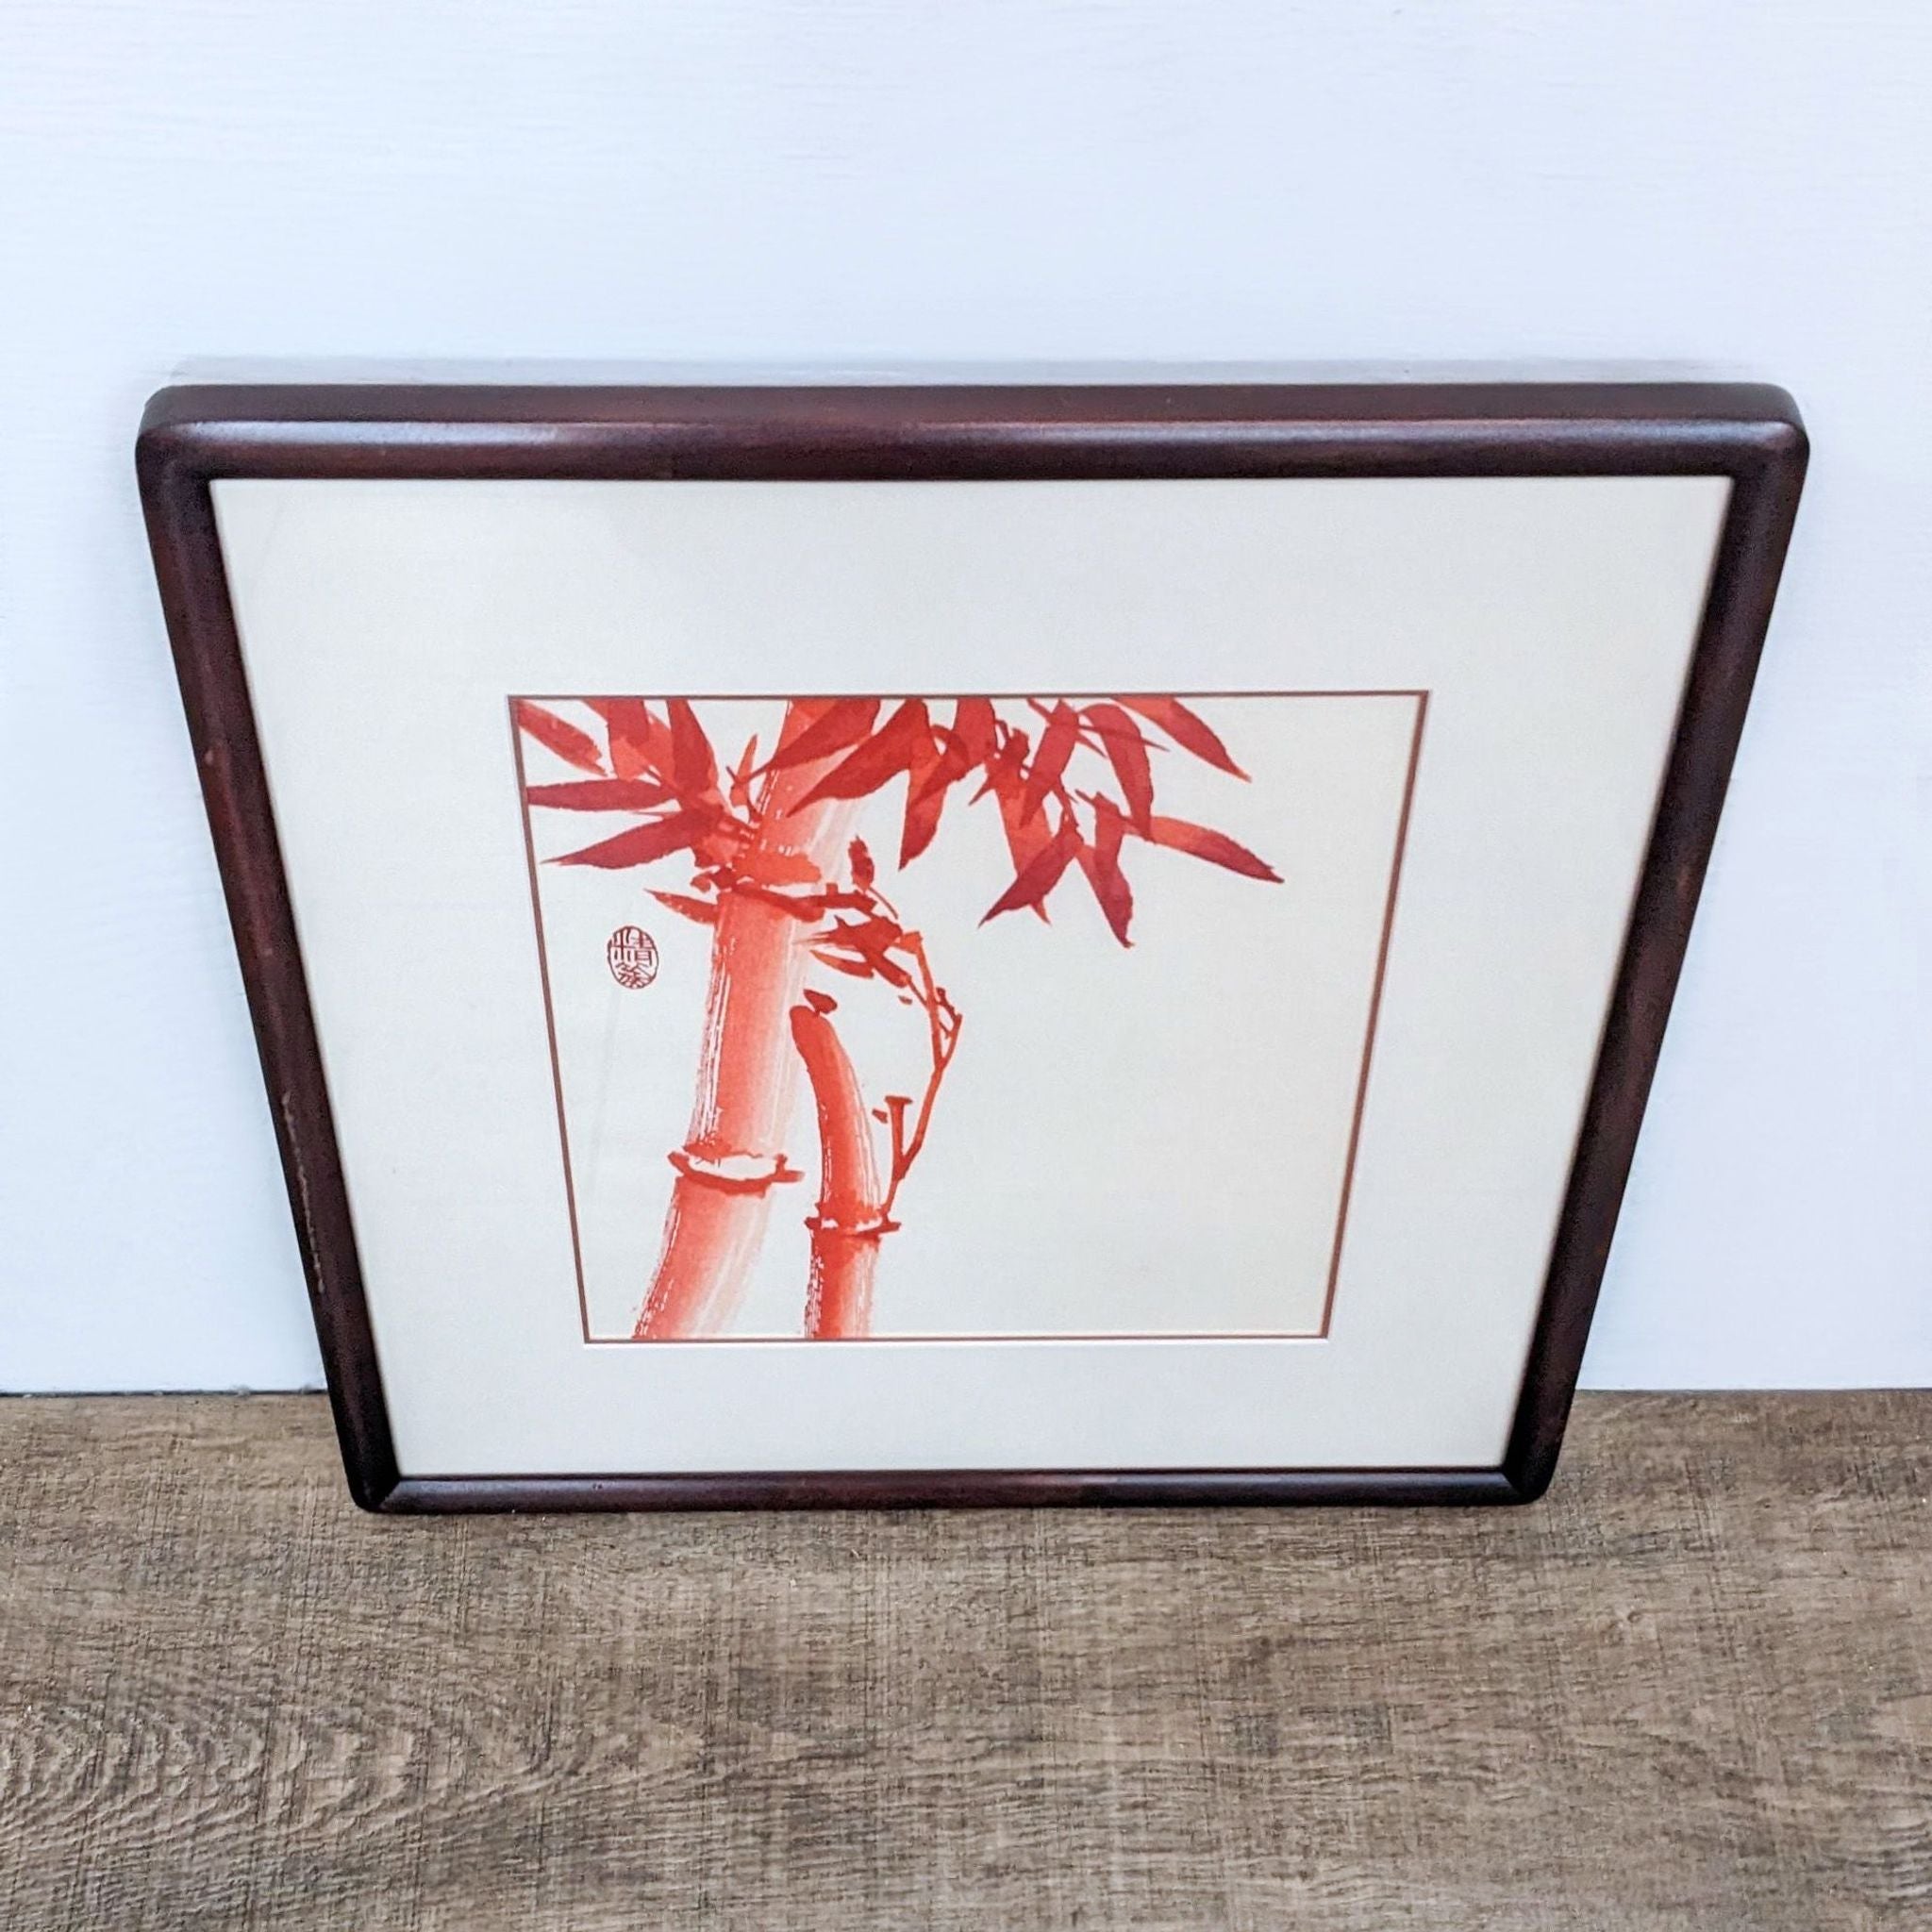 Alt text 2: Framed artwork from Reperch featuring an abstract design of bamboo in red shade, enclosed in a glass cover for elegant wall display.